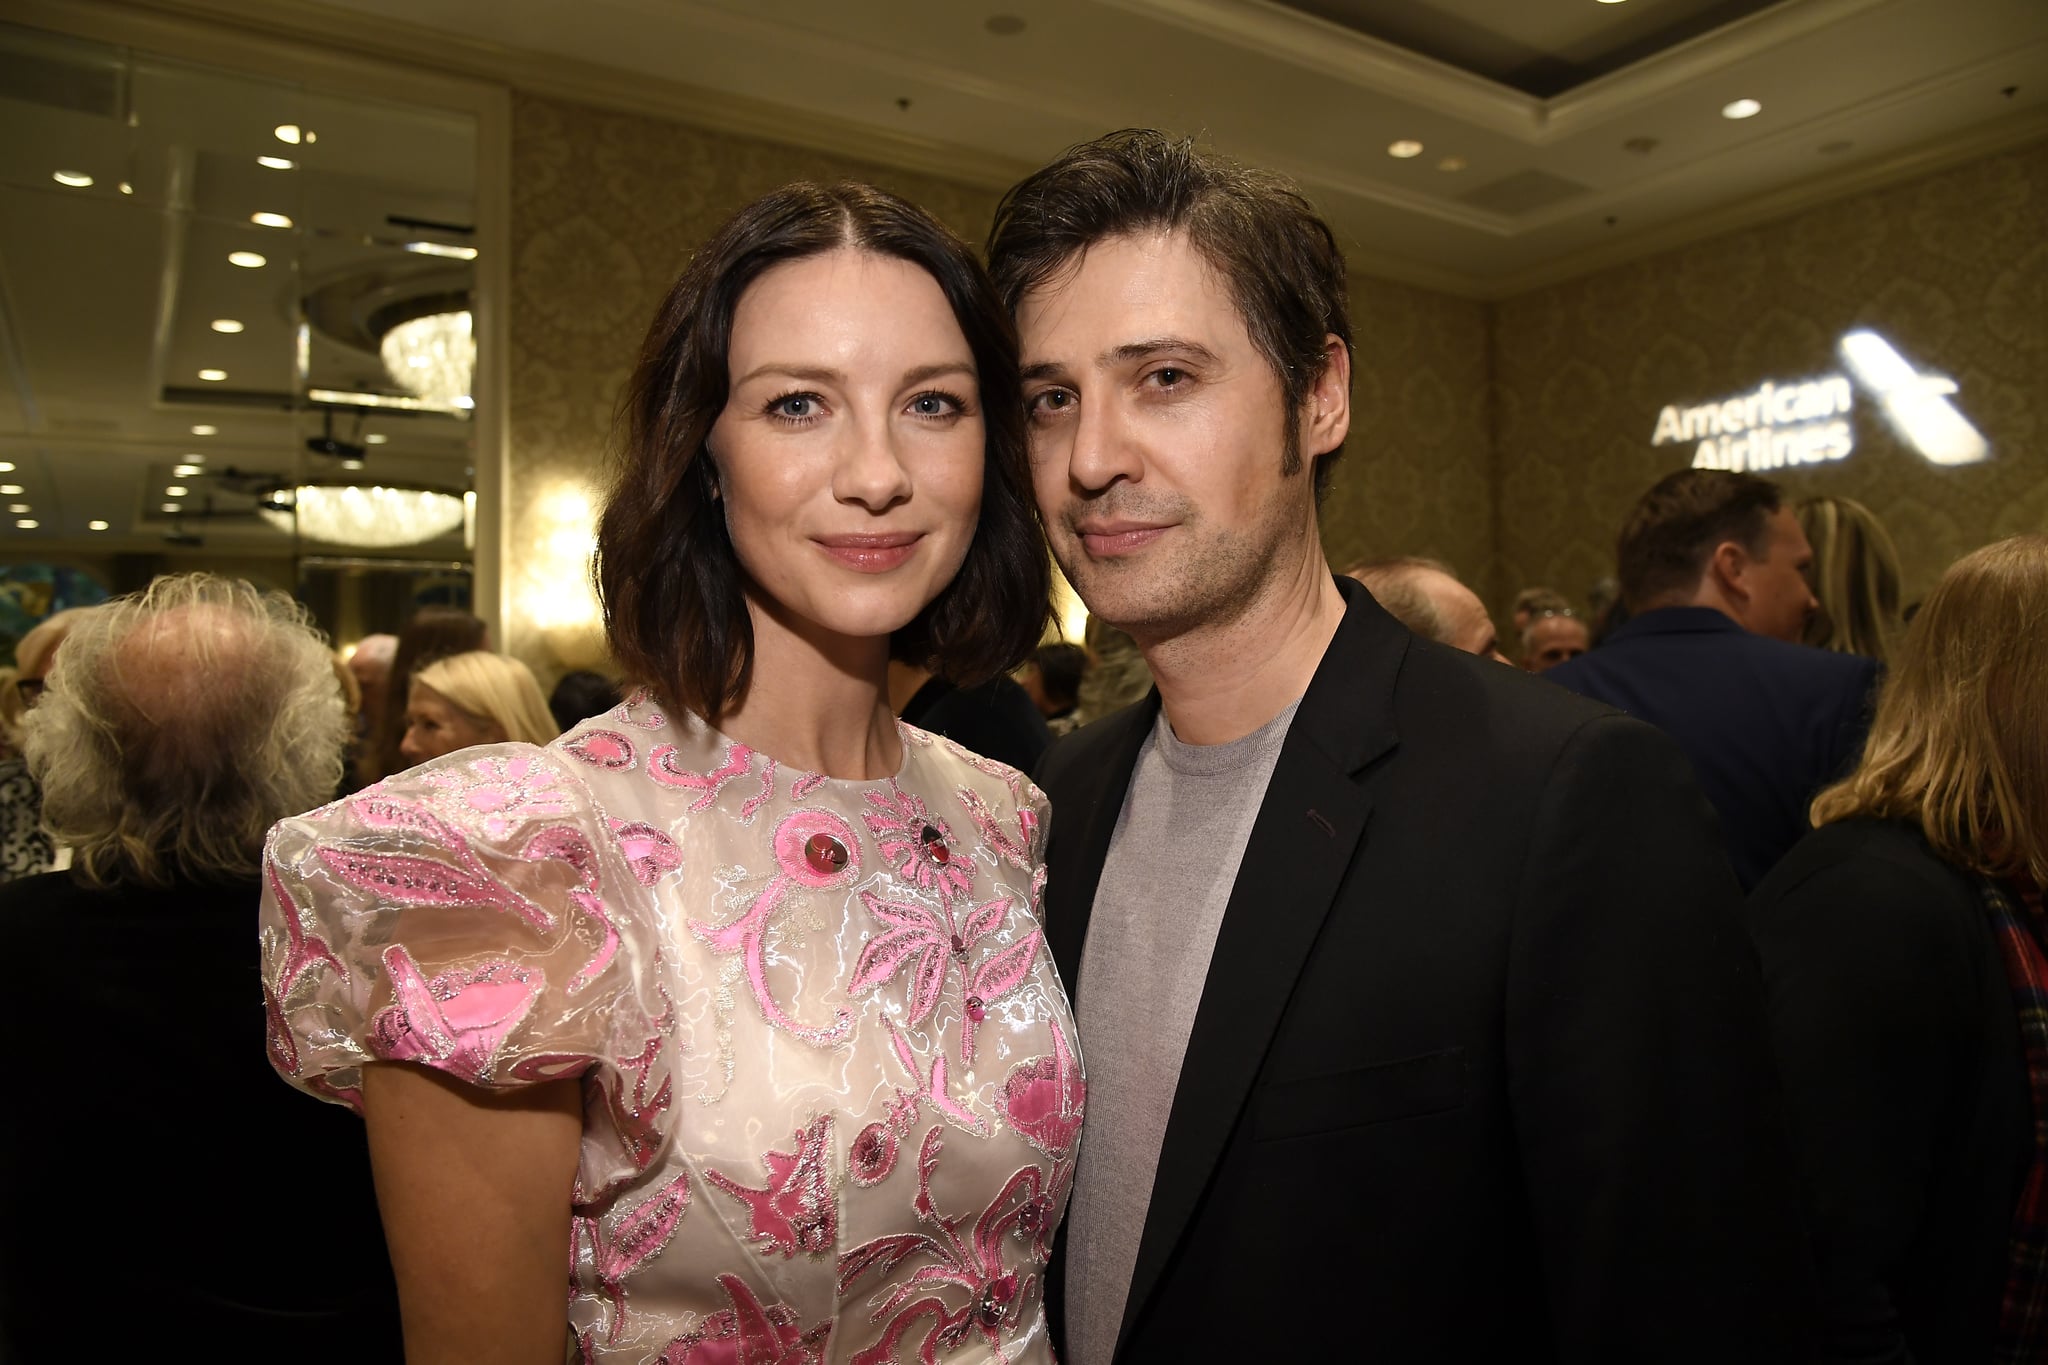 LOS ANGELES, CA - JANUARY 05:  Caitriona Balfe (L) and Tony McGill attends The BAFTA Los Angeles Tea Party at Four Seasons Hotel Los Angeles at Beverly Hills on January 5, 2019 in Los Angeles, California.  (Photo by Kevork Djansezian/BAFTA LA/Getty Images)